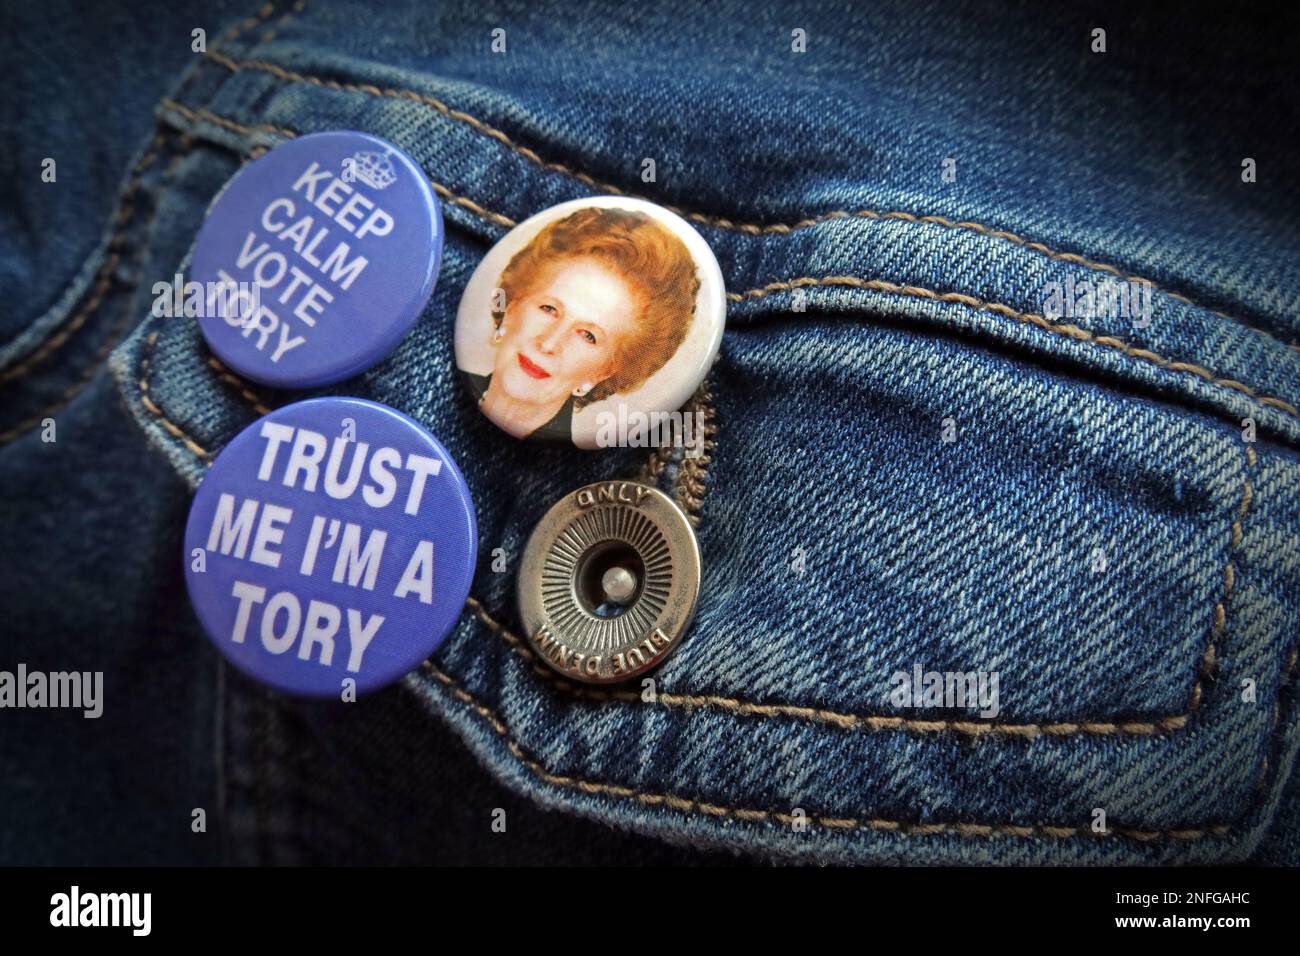 Margaret Thatcher must be spinning in her grave, how low the Tory party polls and disaster PMs such as Boris Johnson, Liz Truss & Rishi Sunak Stock Photo